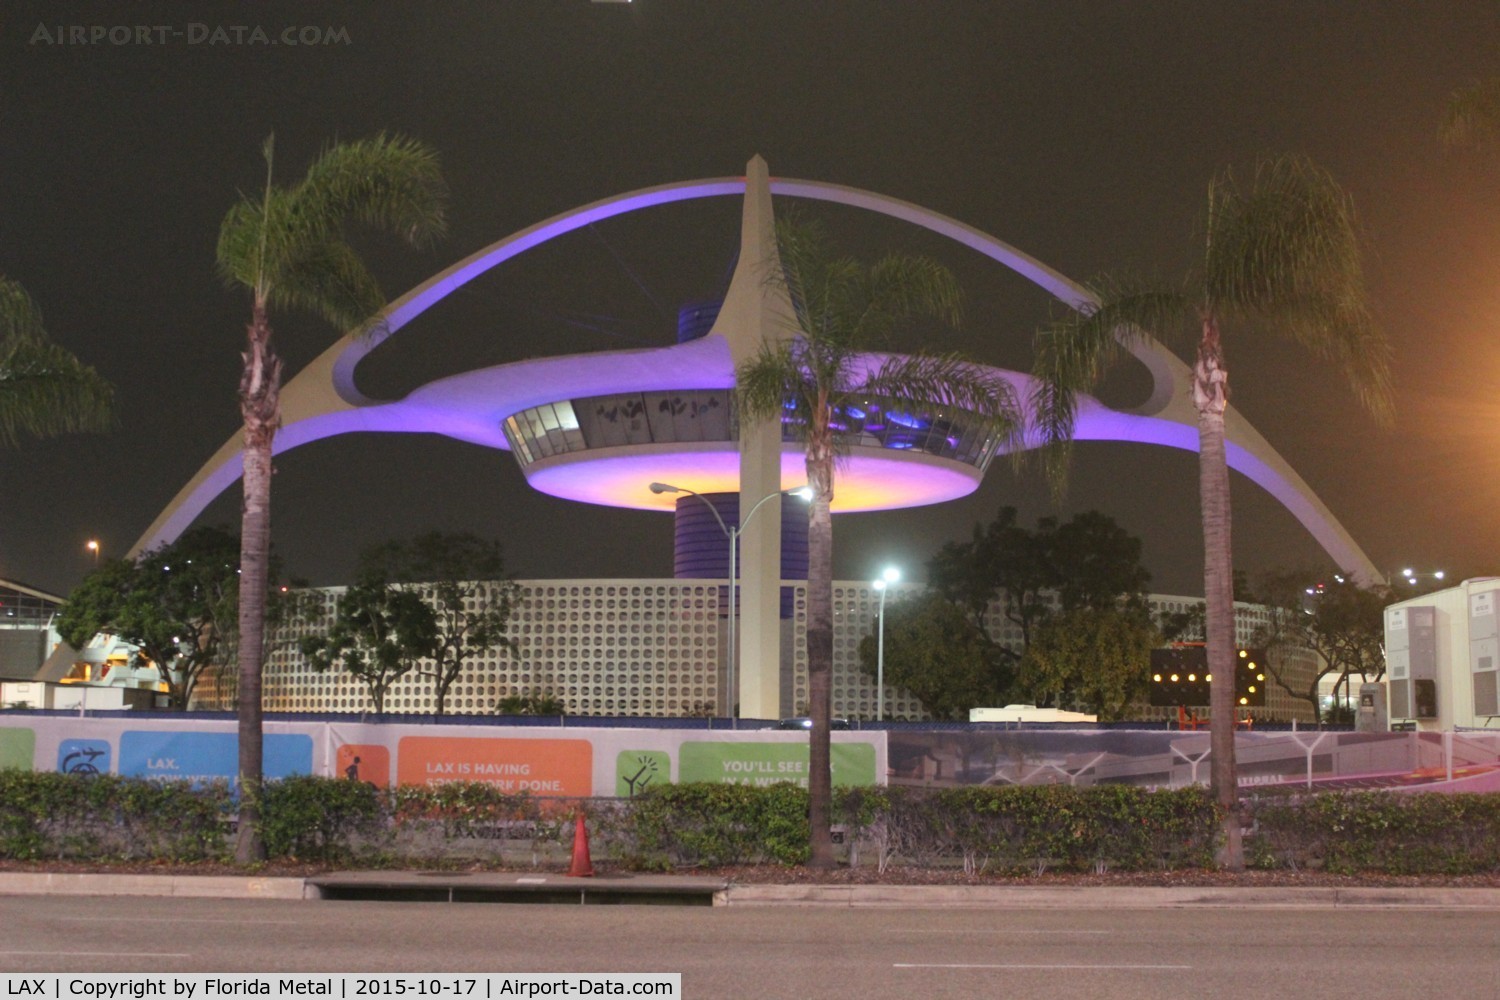 Los Angeles International Airport (LAX) - Theme building at night